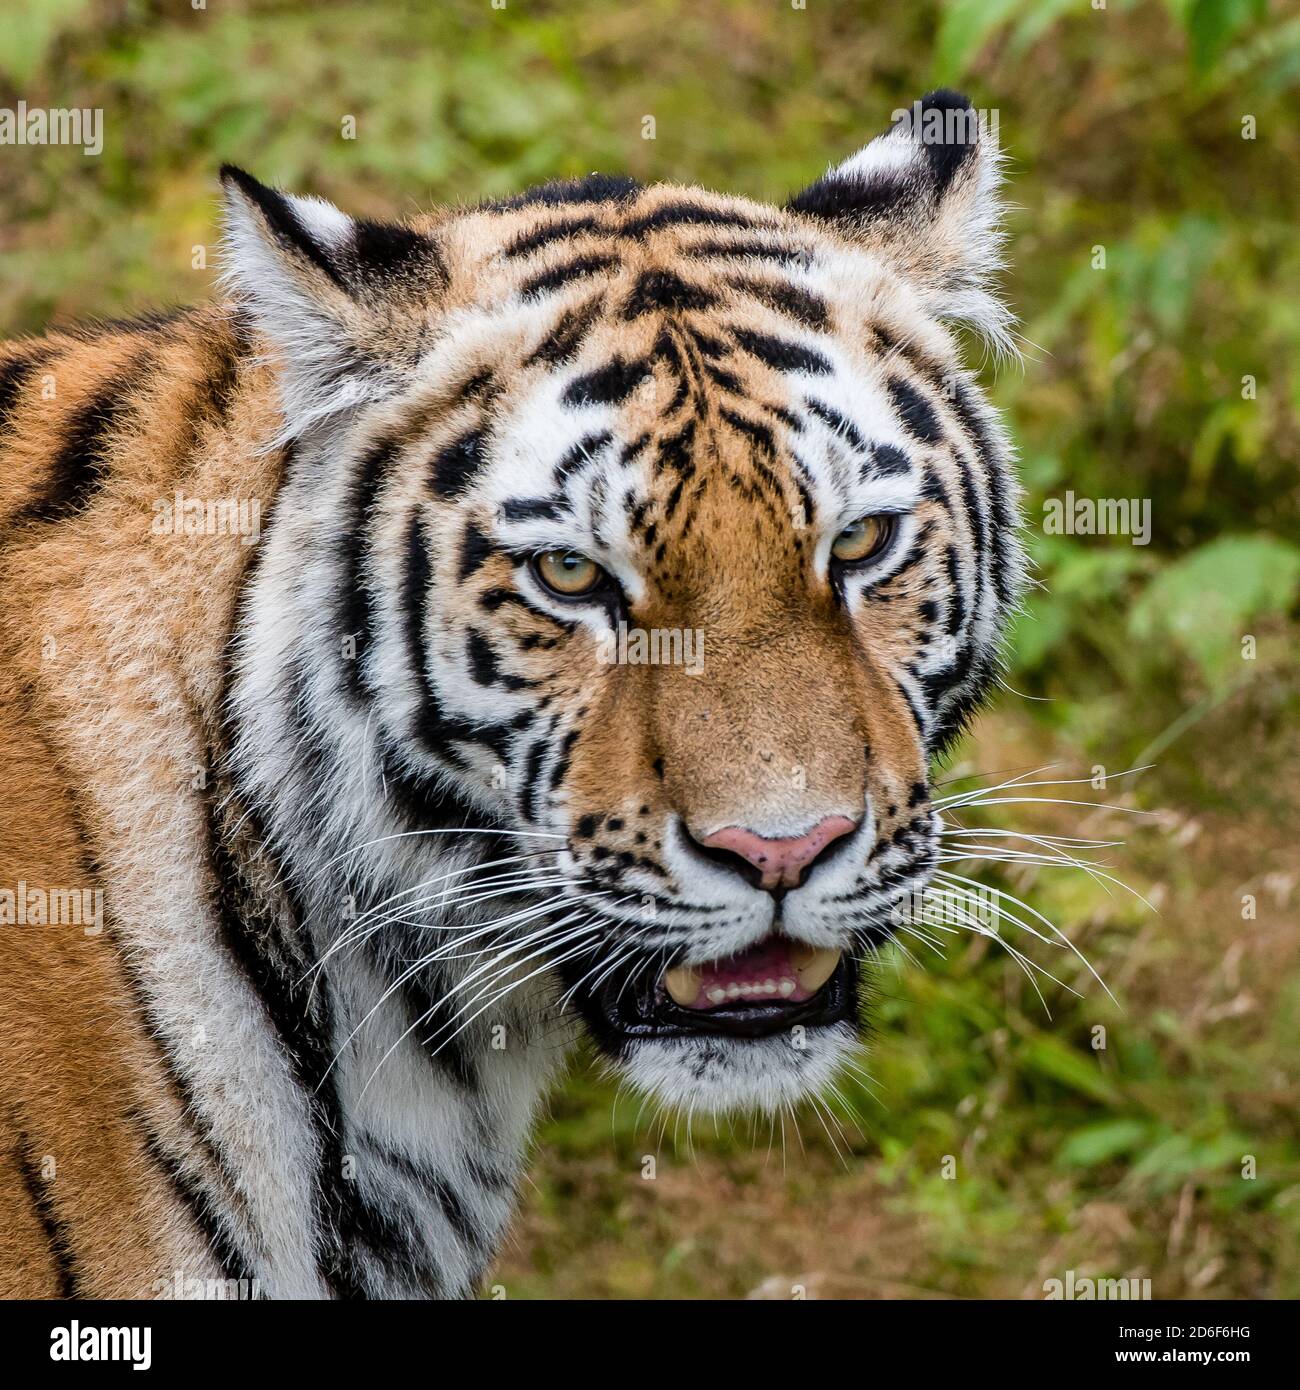 Portrait of a Siberian tiger or Amur tiger looking at you in Orsa Bear Park, Sweden. In August. The tiger is reddish-rusty, or rusty-yellow in colour, Stock Photo